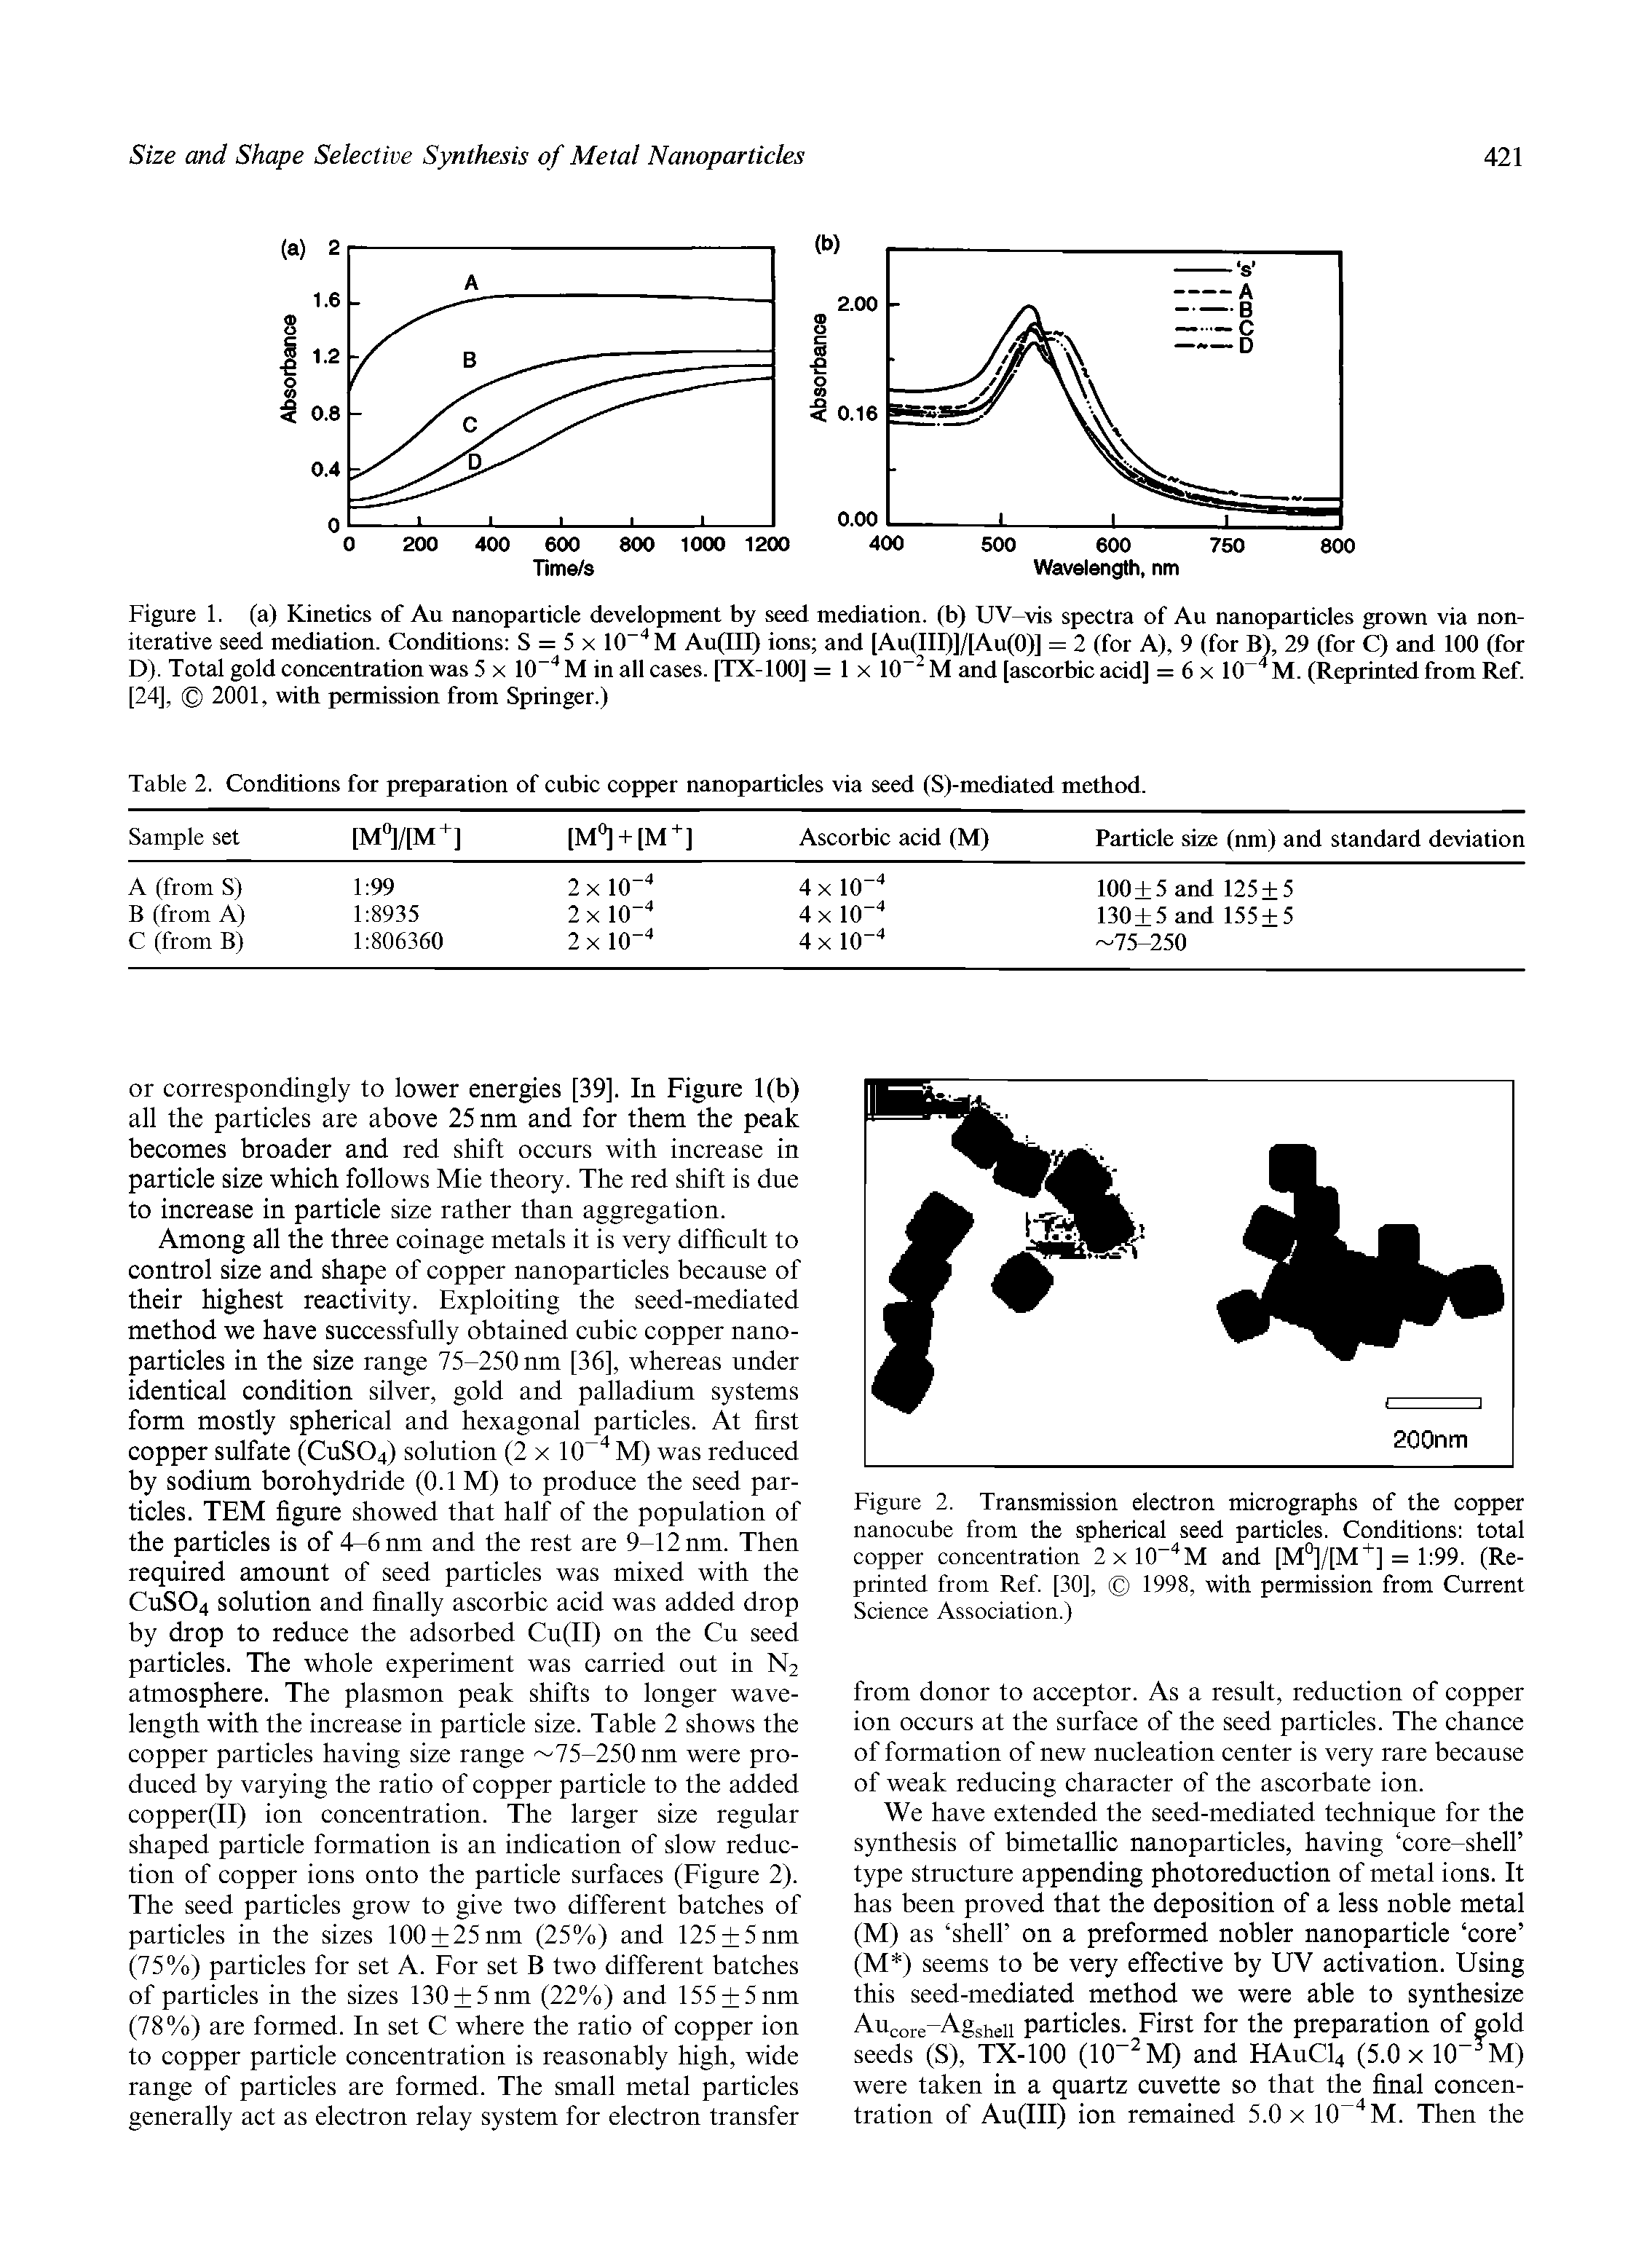 Figure 2. Transmission electron micrographs of the copper nanocube from the spherical seed particles. Conditions total copper concentration 2xl0 M and [M ]/[M ] = 1 99. (Reprinted from Ref [30], 1998, with permission from Current Science Association.)...